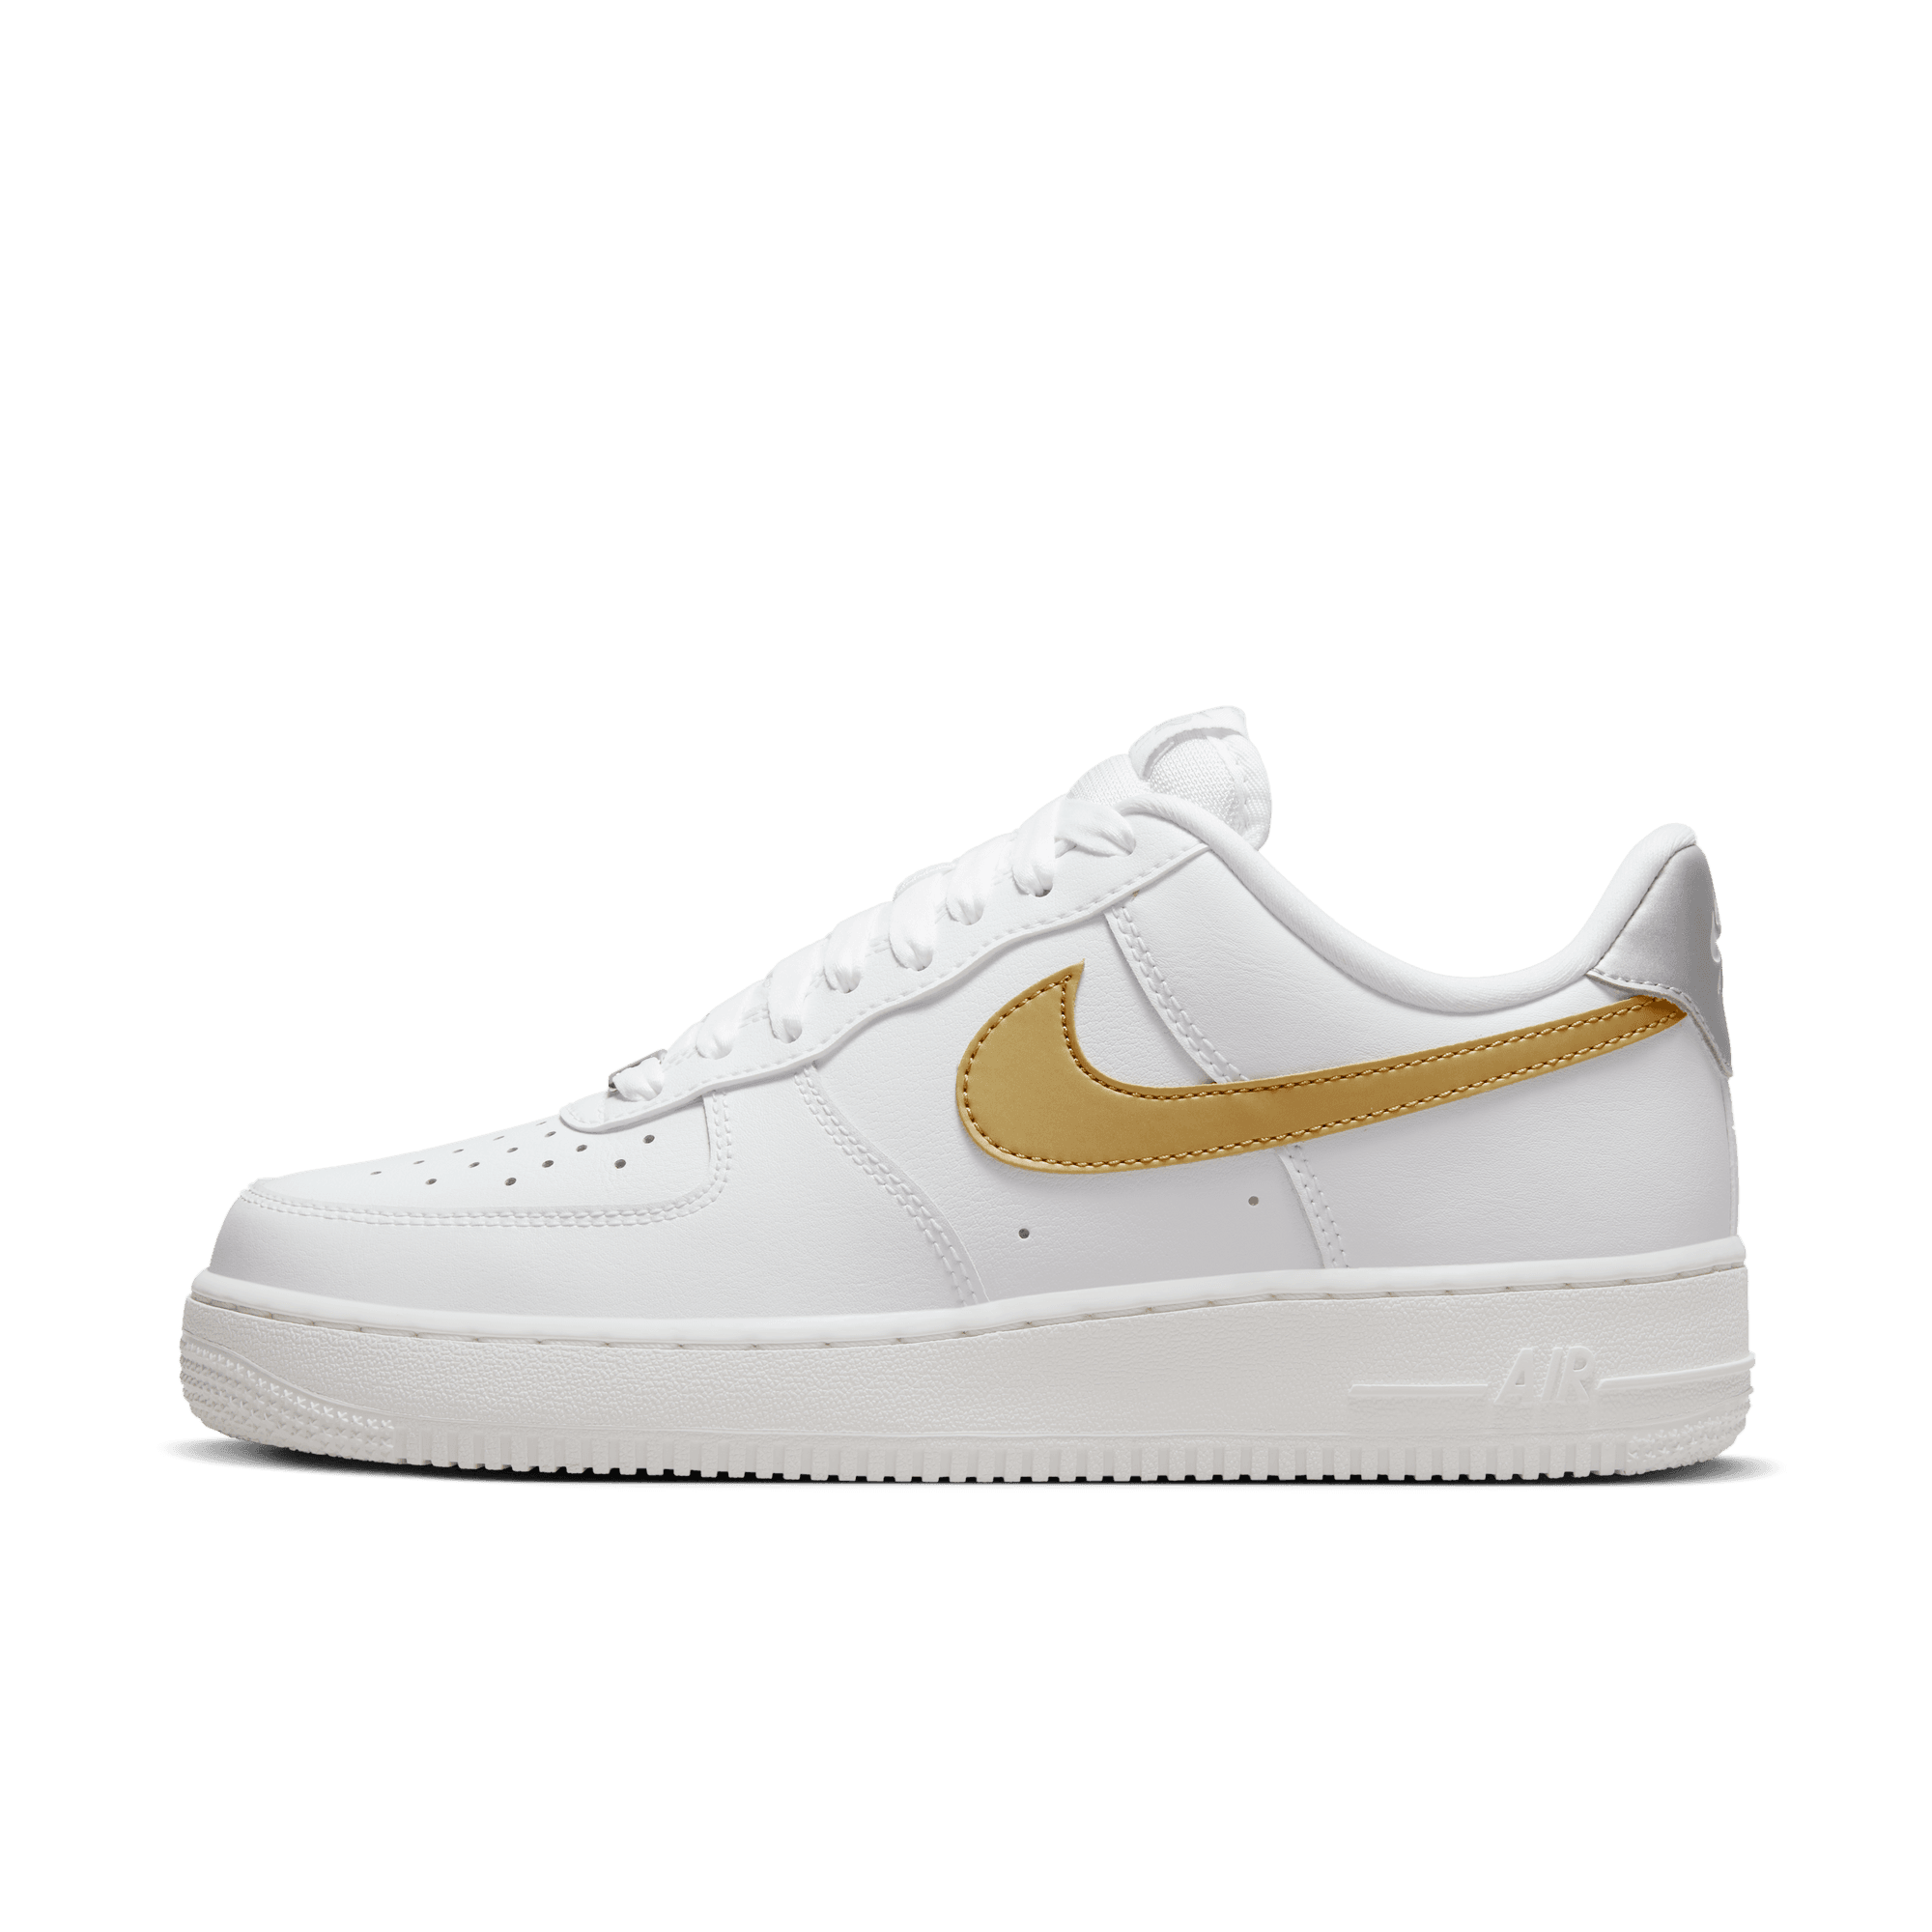 Nike Air Force 1 '07 - Women's - GBNY